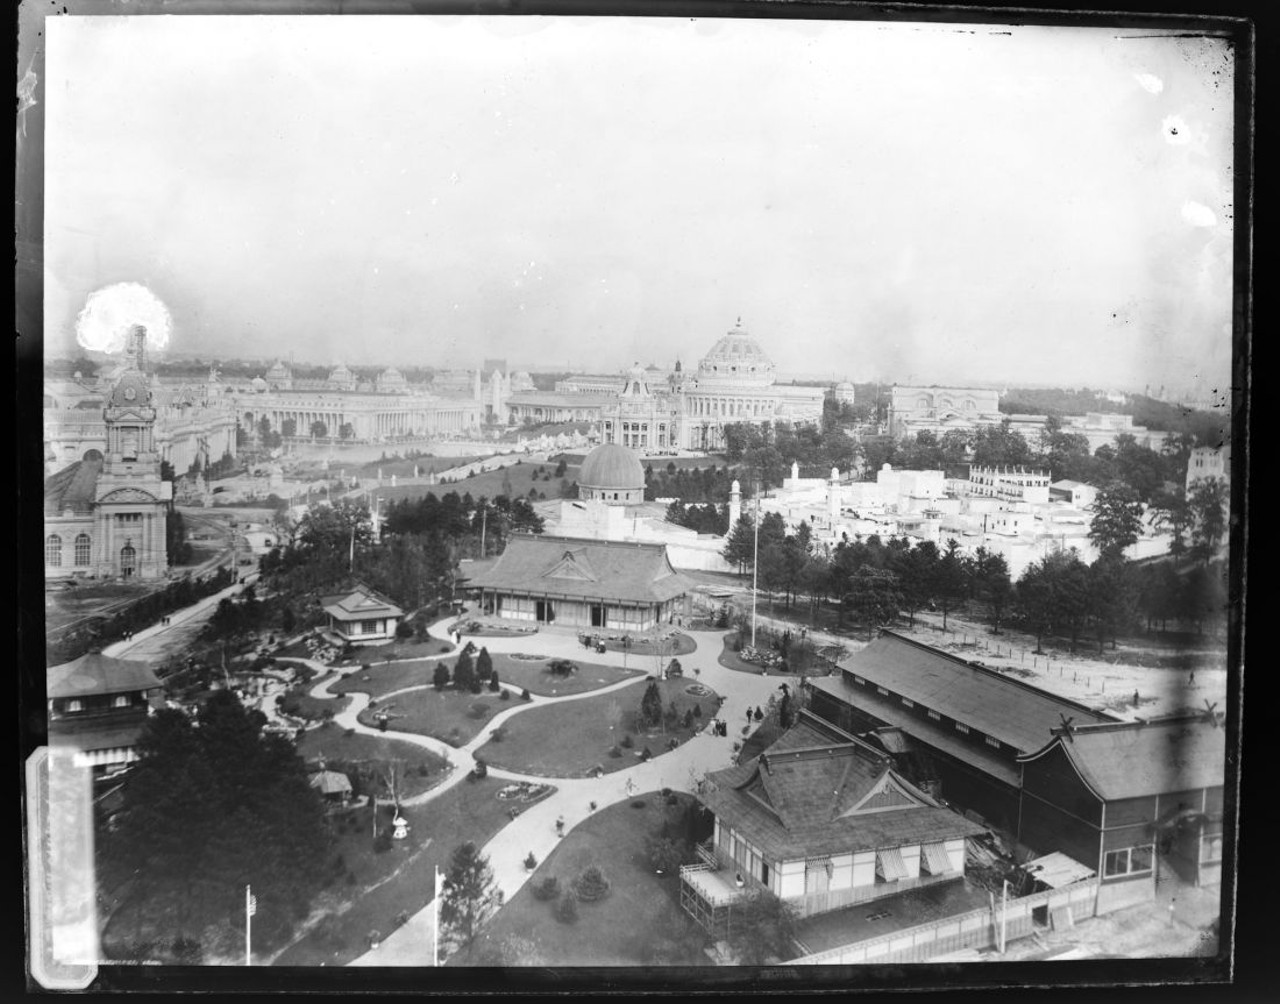 1904 WORLD'S FAIR VIEW TO EAST FROM THE FERRIS WHEEL
Find out more about this photo at MoHistory.org.